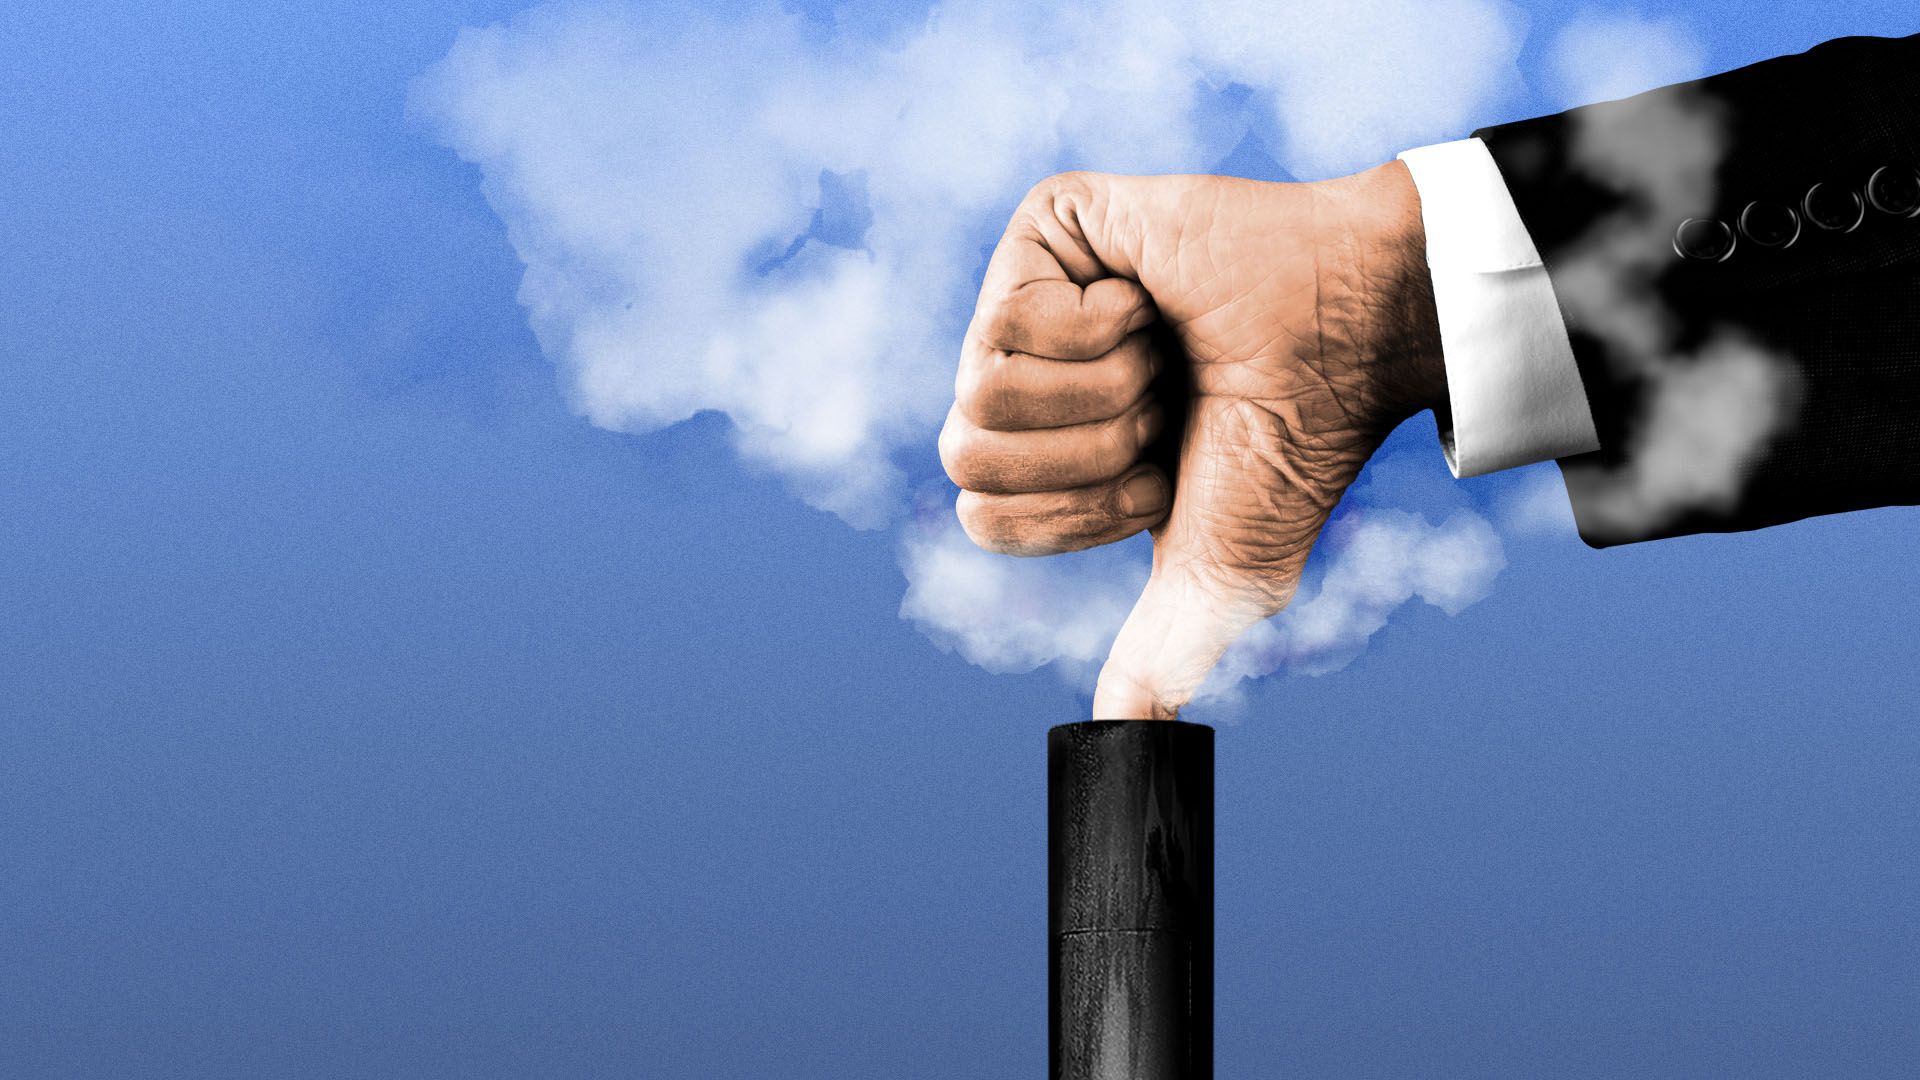 IIllustration of a hand in a suit plugging up a smokestack